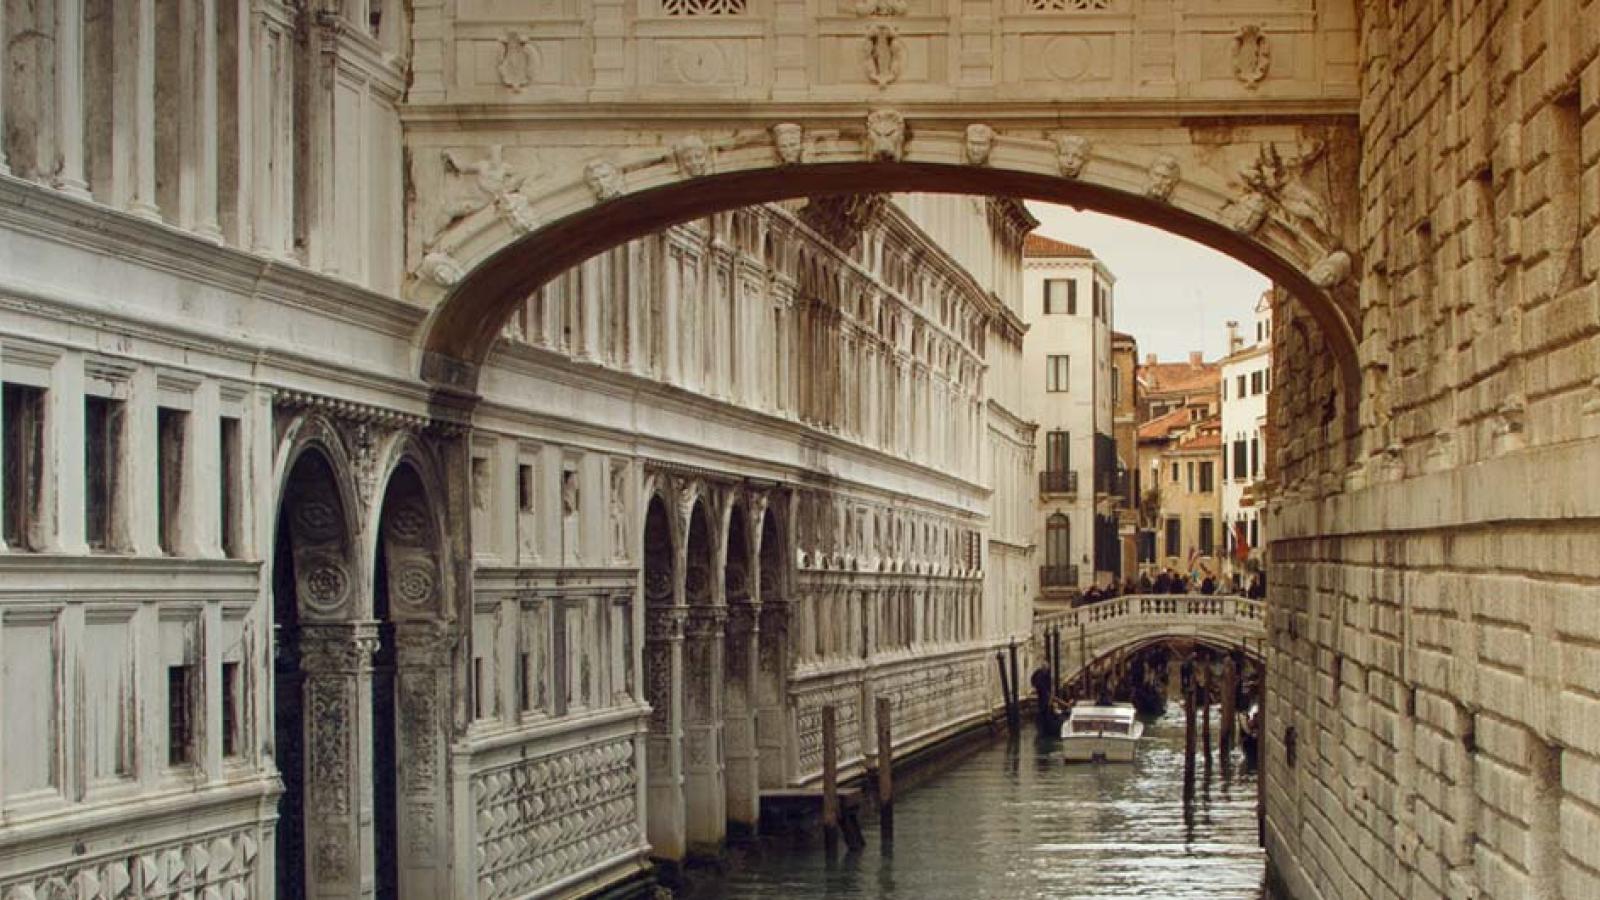 Venice Canal View